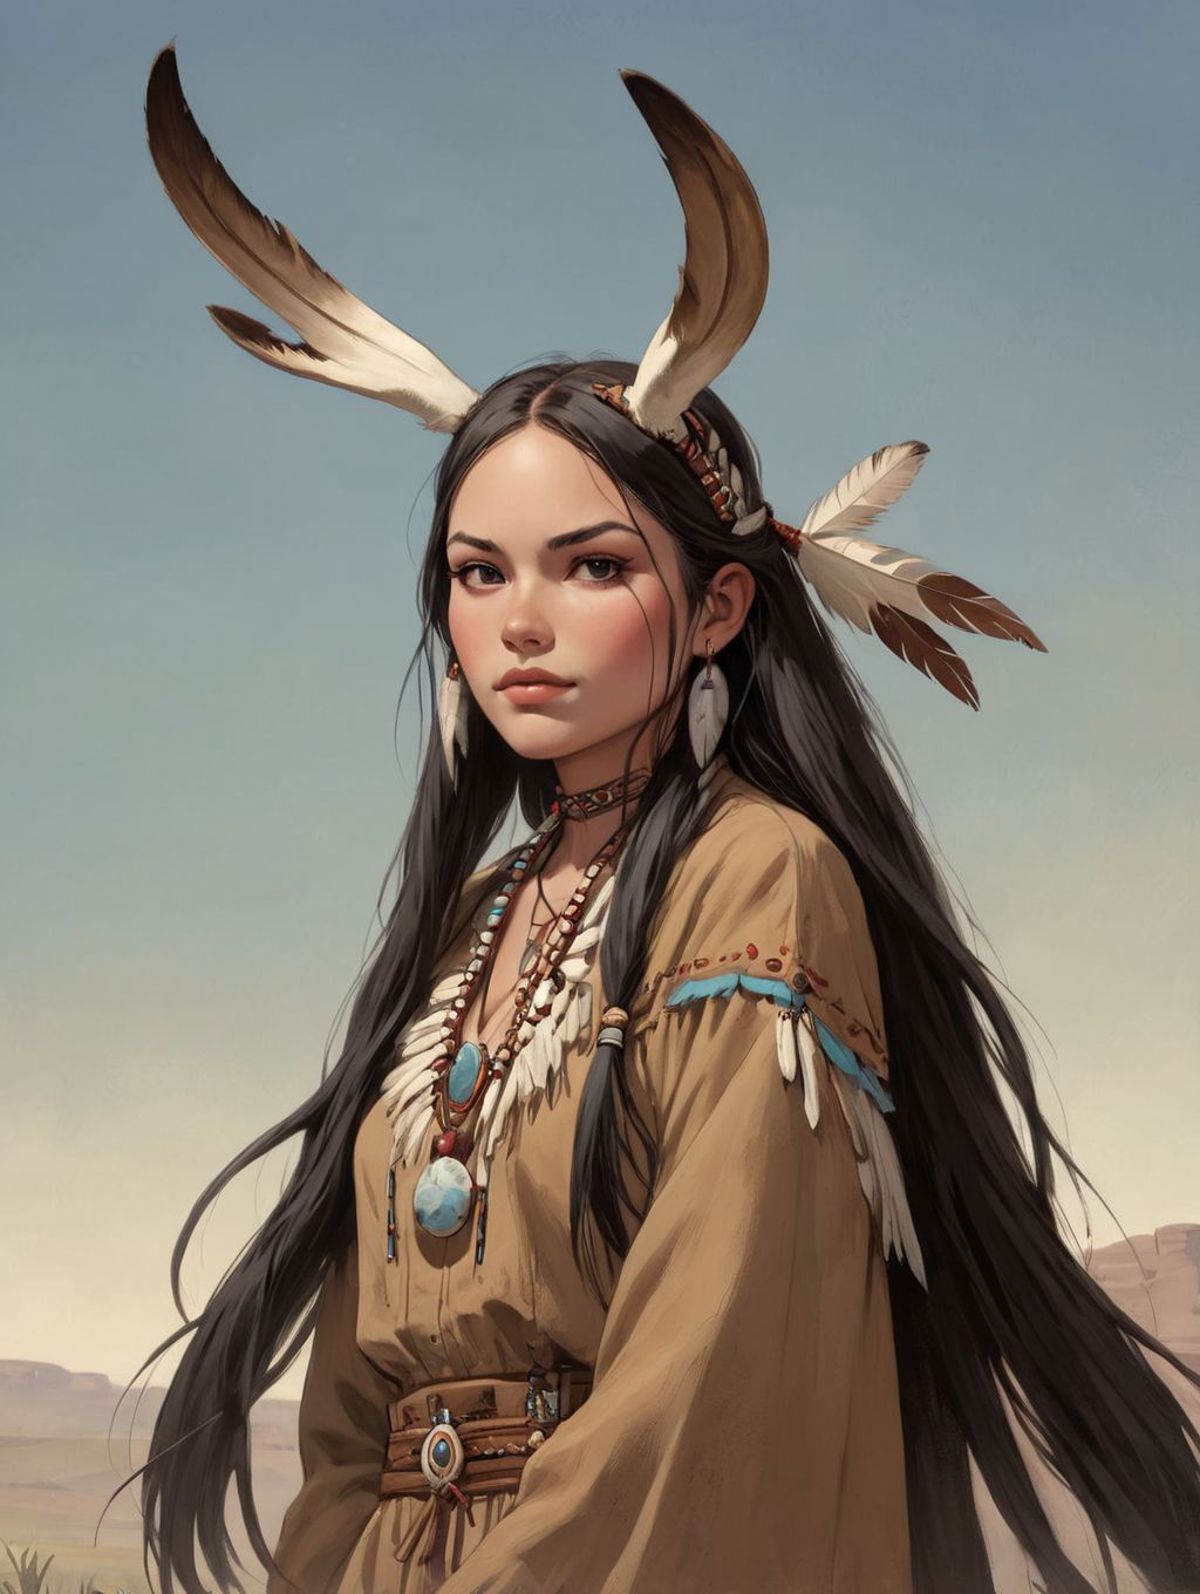 A Native American woman with black hair and a feather headband wearing a tan dress.